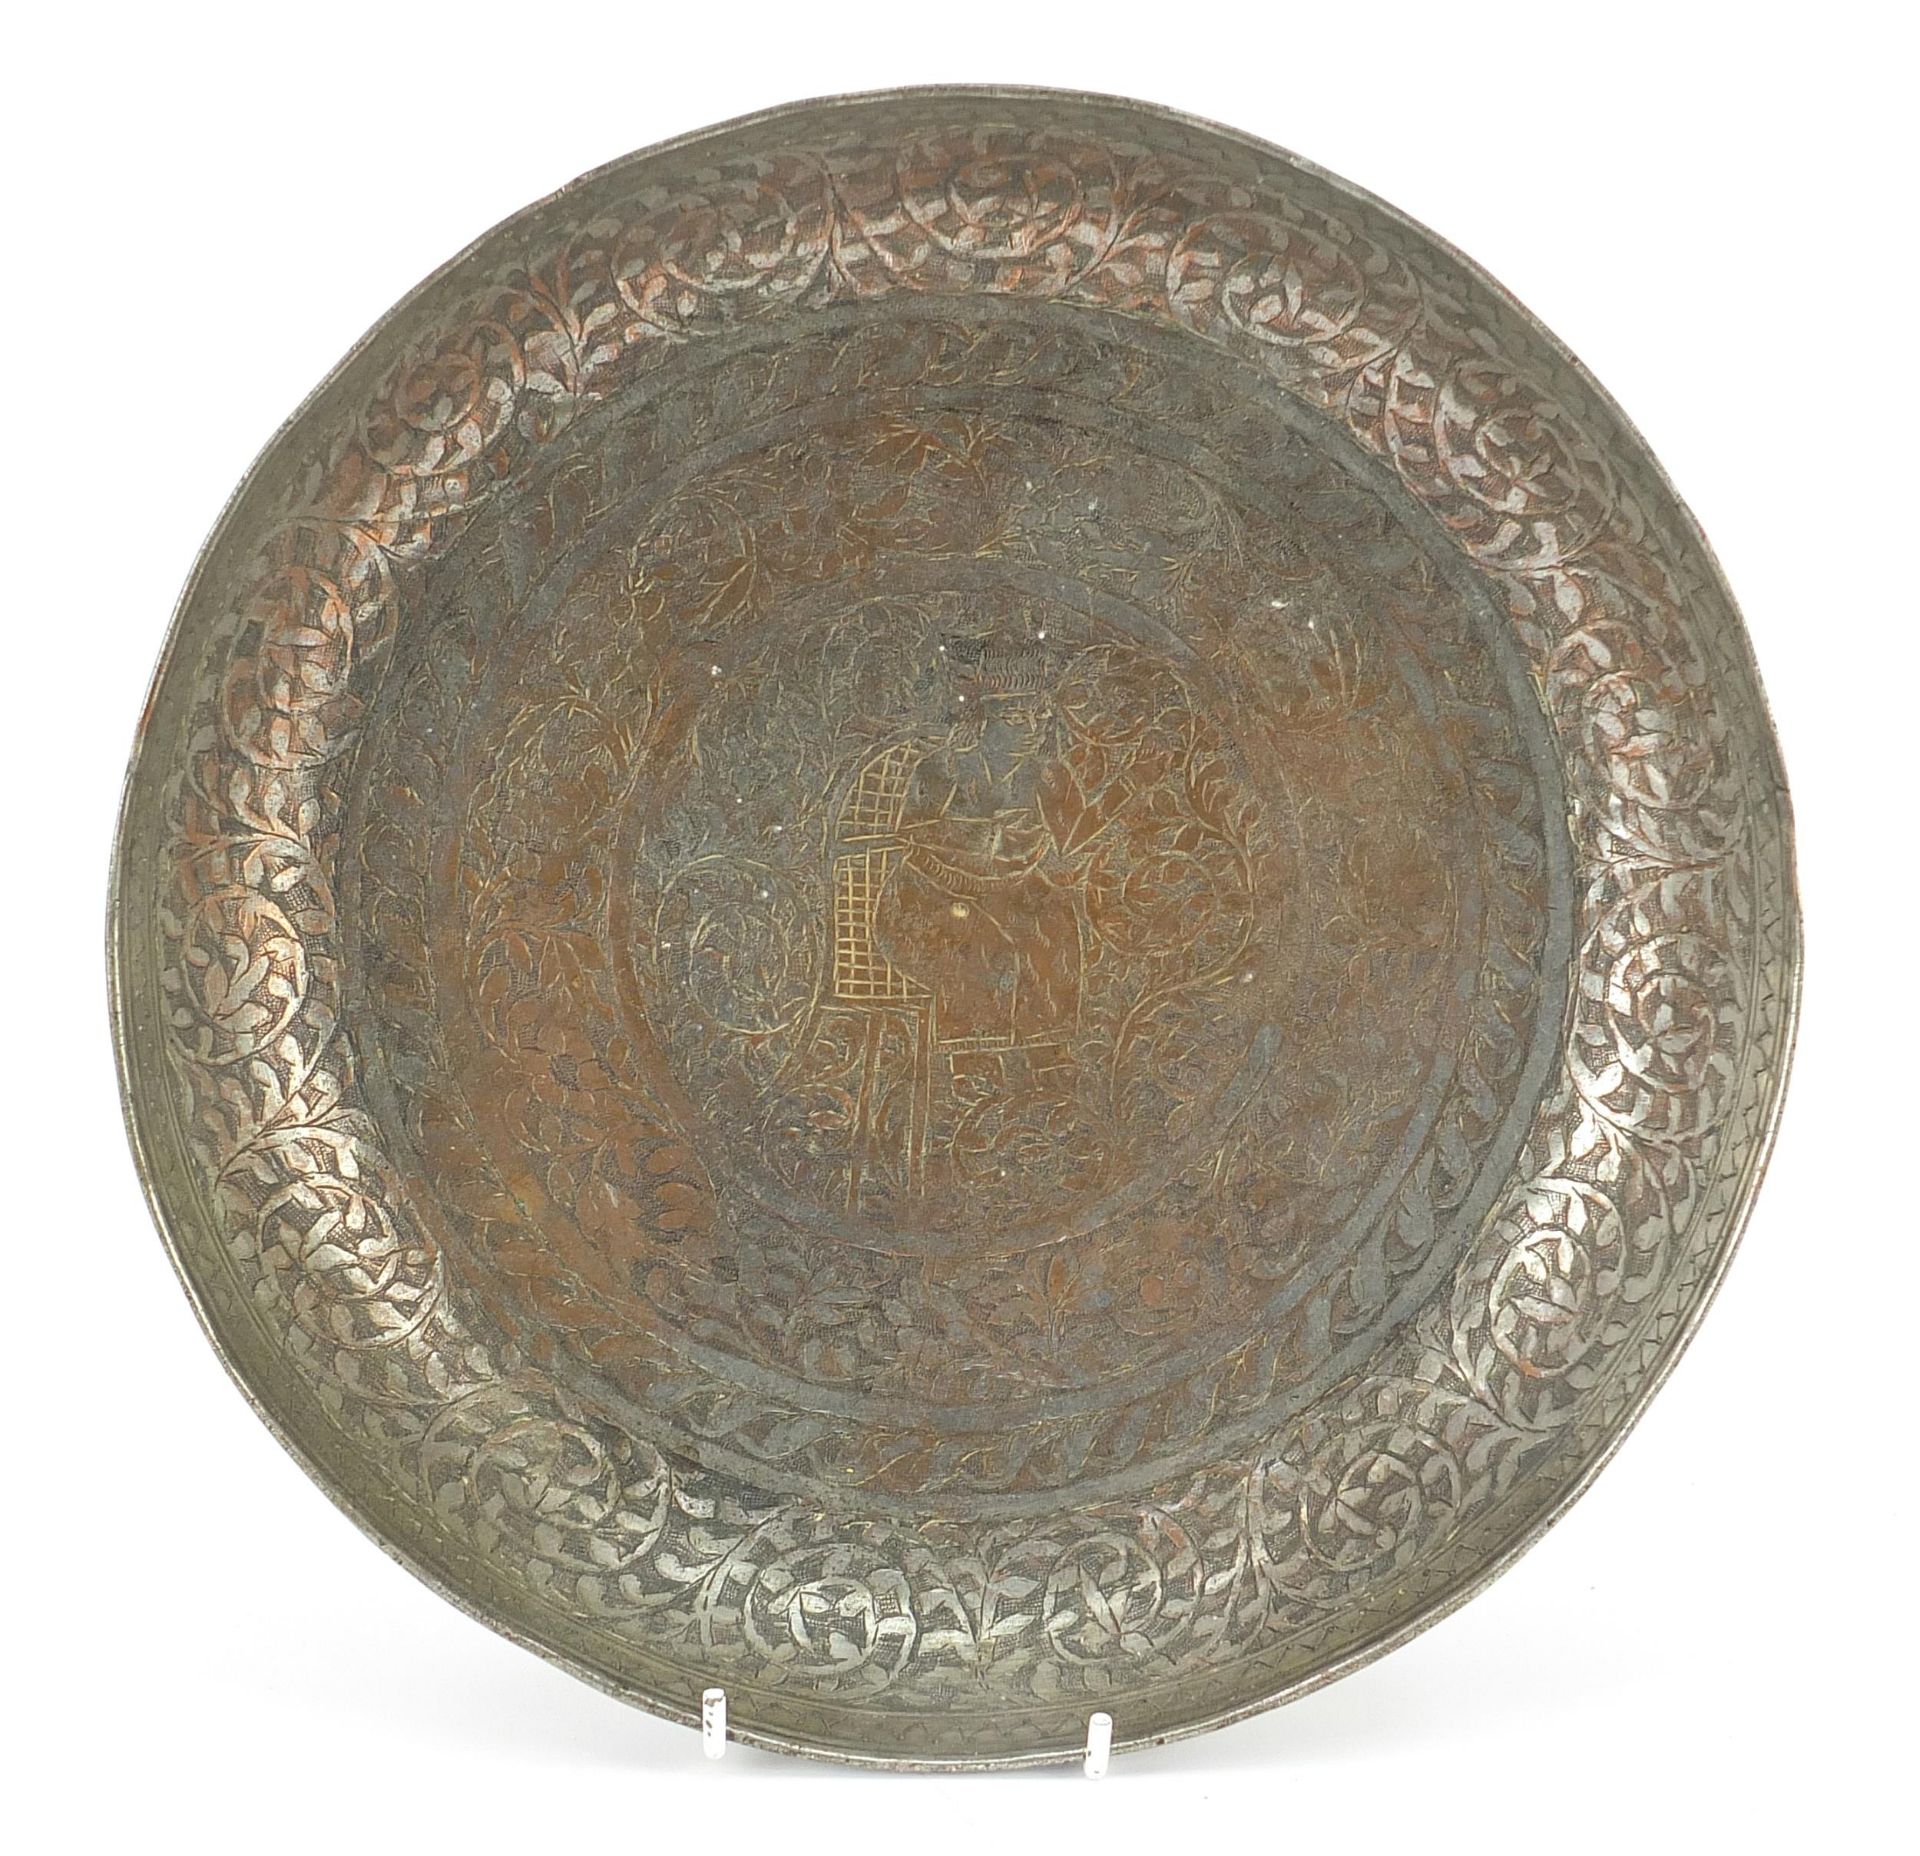 Turkish silvered copper dish engraved with a figure seated in the centre surrounded by flowers and